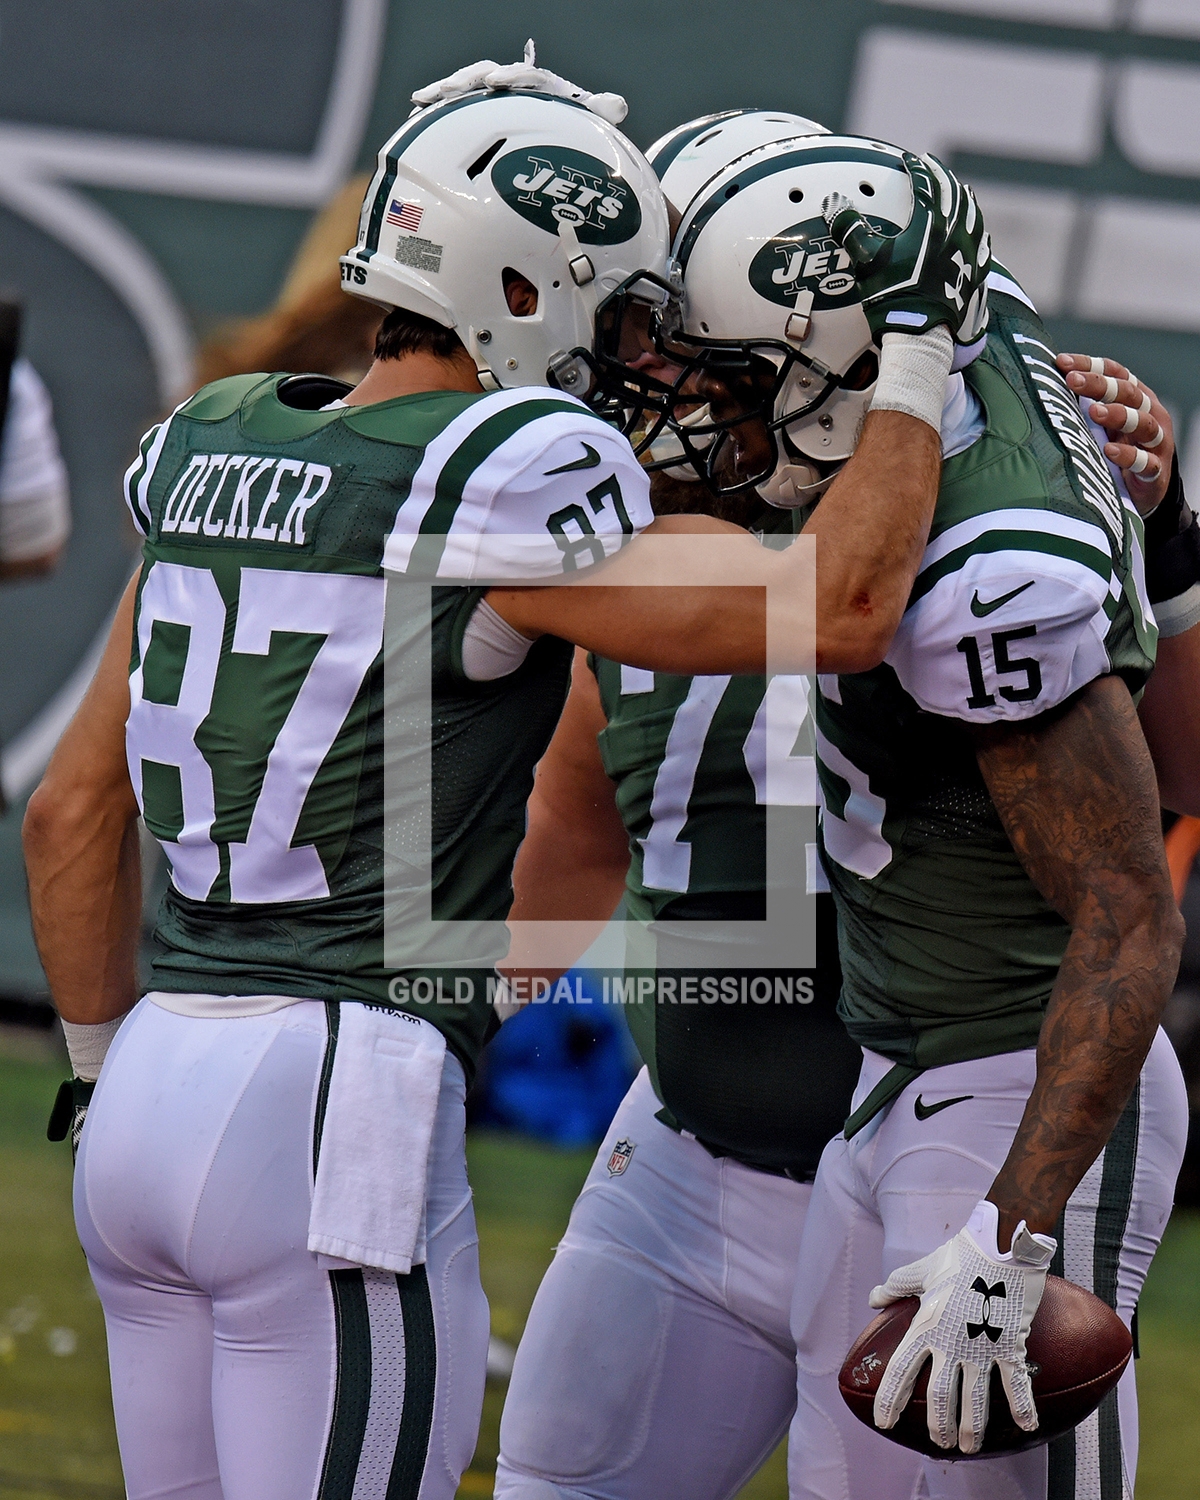 New York Jets wide receivers BRANDON MARSHALL and ERIC DECKER celebrate BRANDON MARSHALL S touchdown reception against the New England Patriots in the first quarter at MetLIFE stadiium giving the Jets a 10-3 lead. The Jets went on to win 26-20 in overtime.